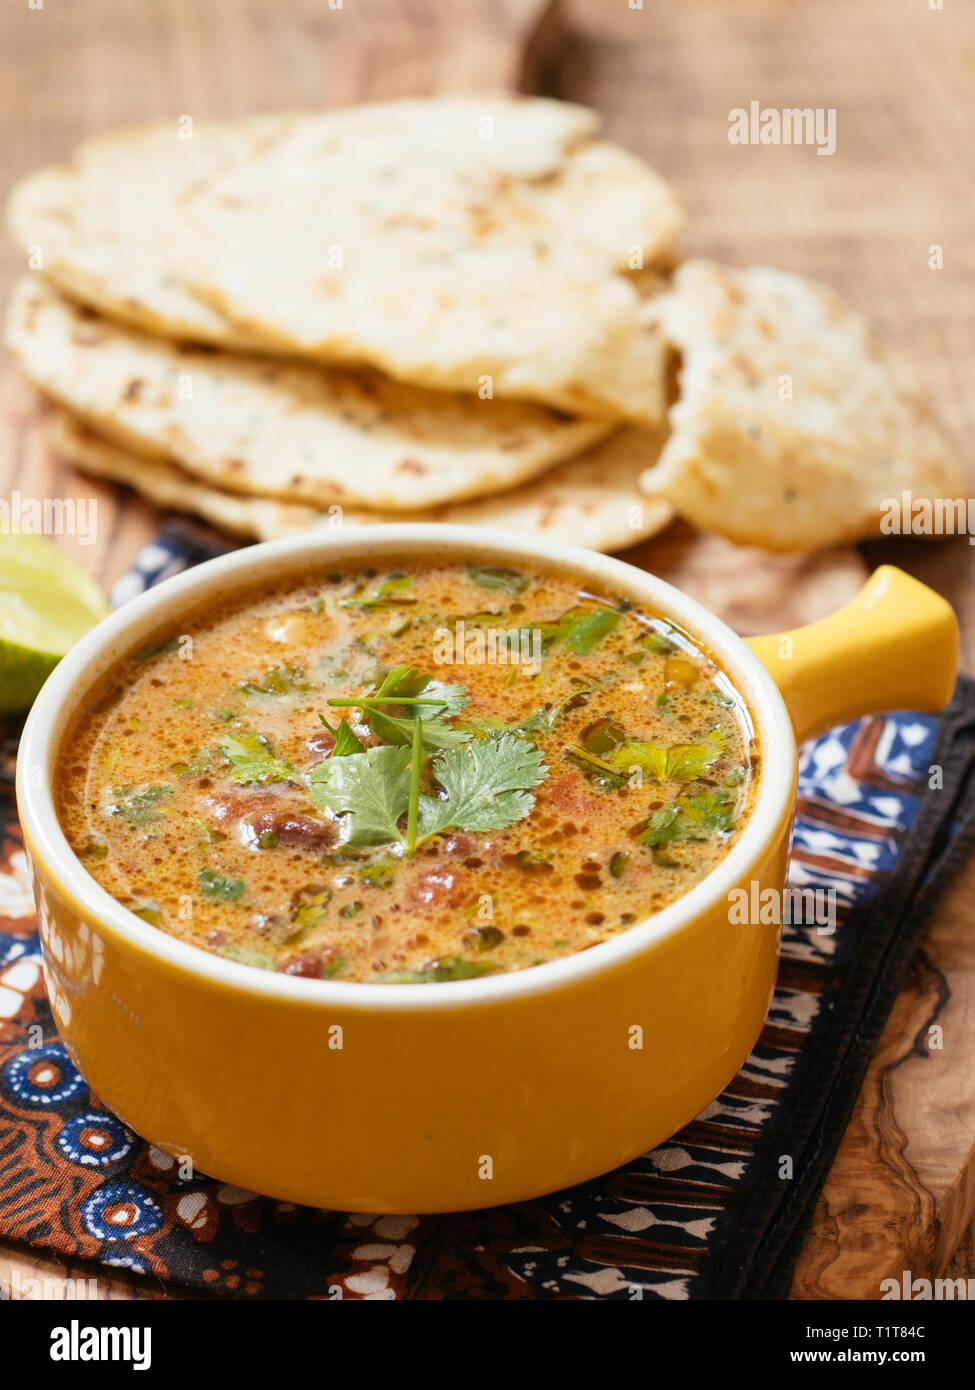 Curried Mung Bean Soup with Naan Breads Stock Photo